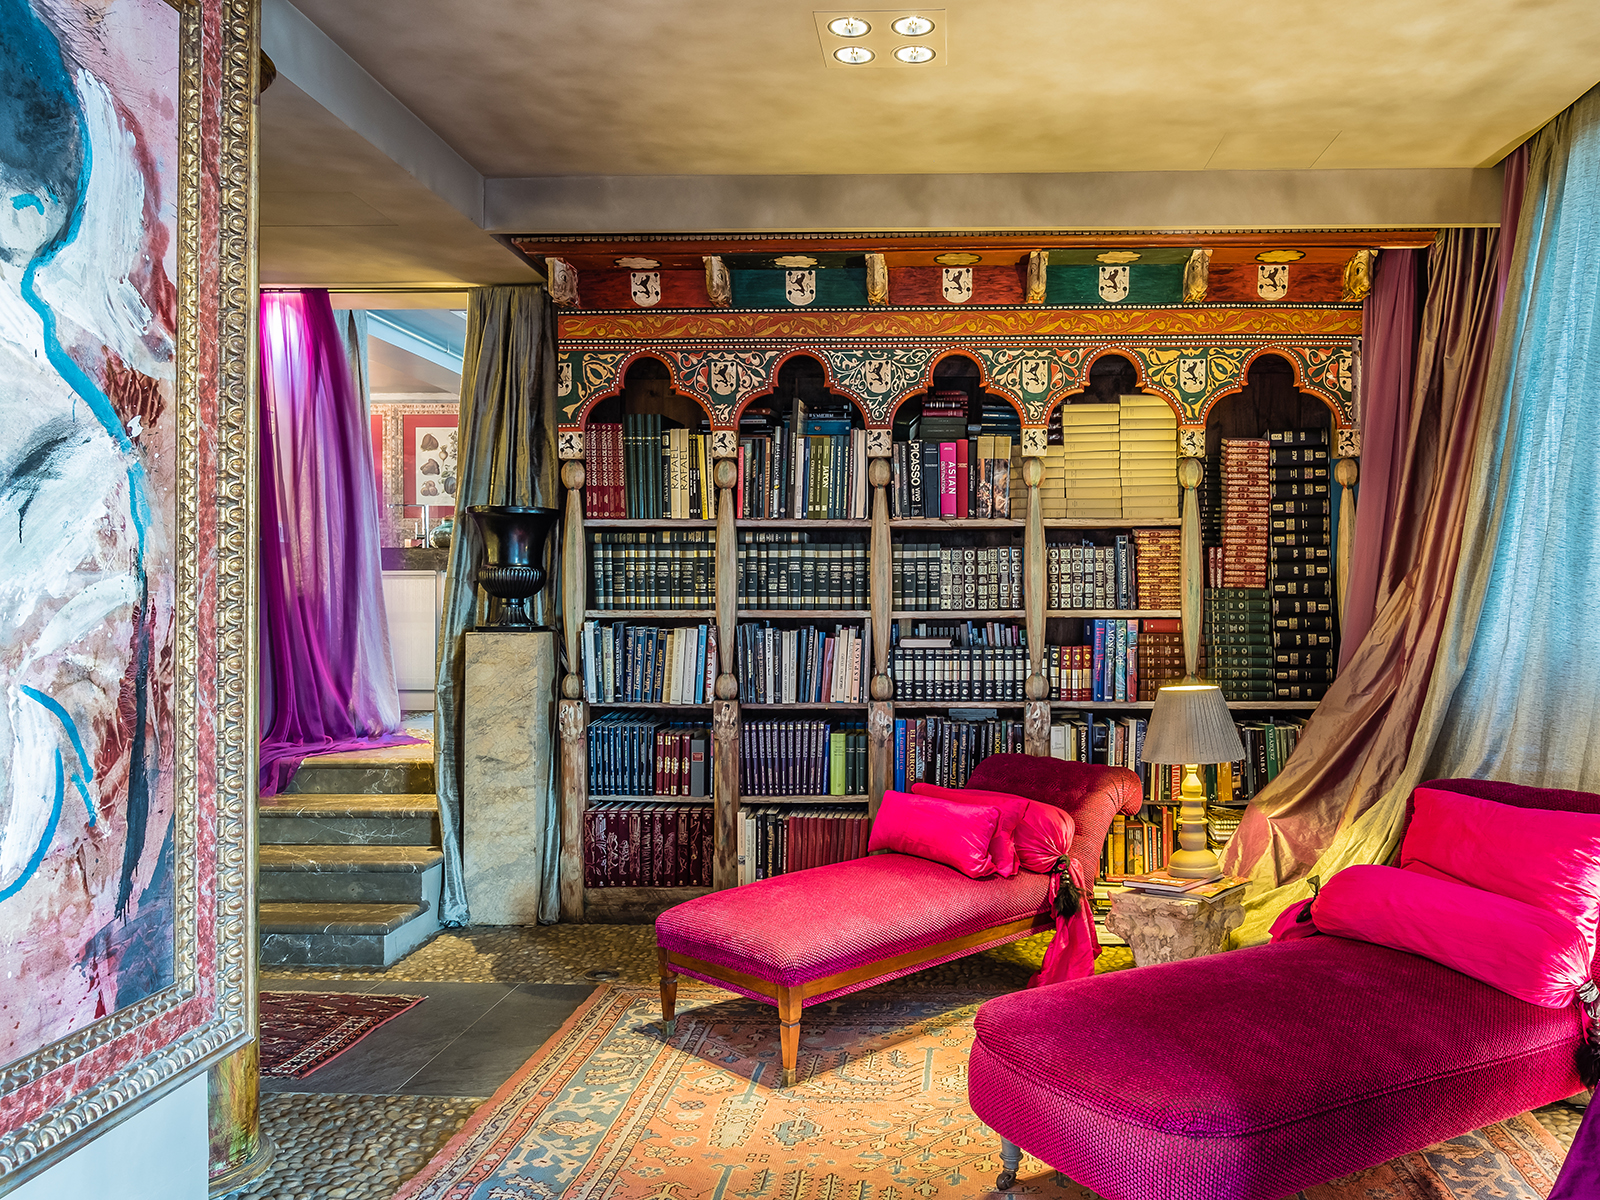 A home library with art and velvet chaise lounges